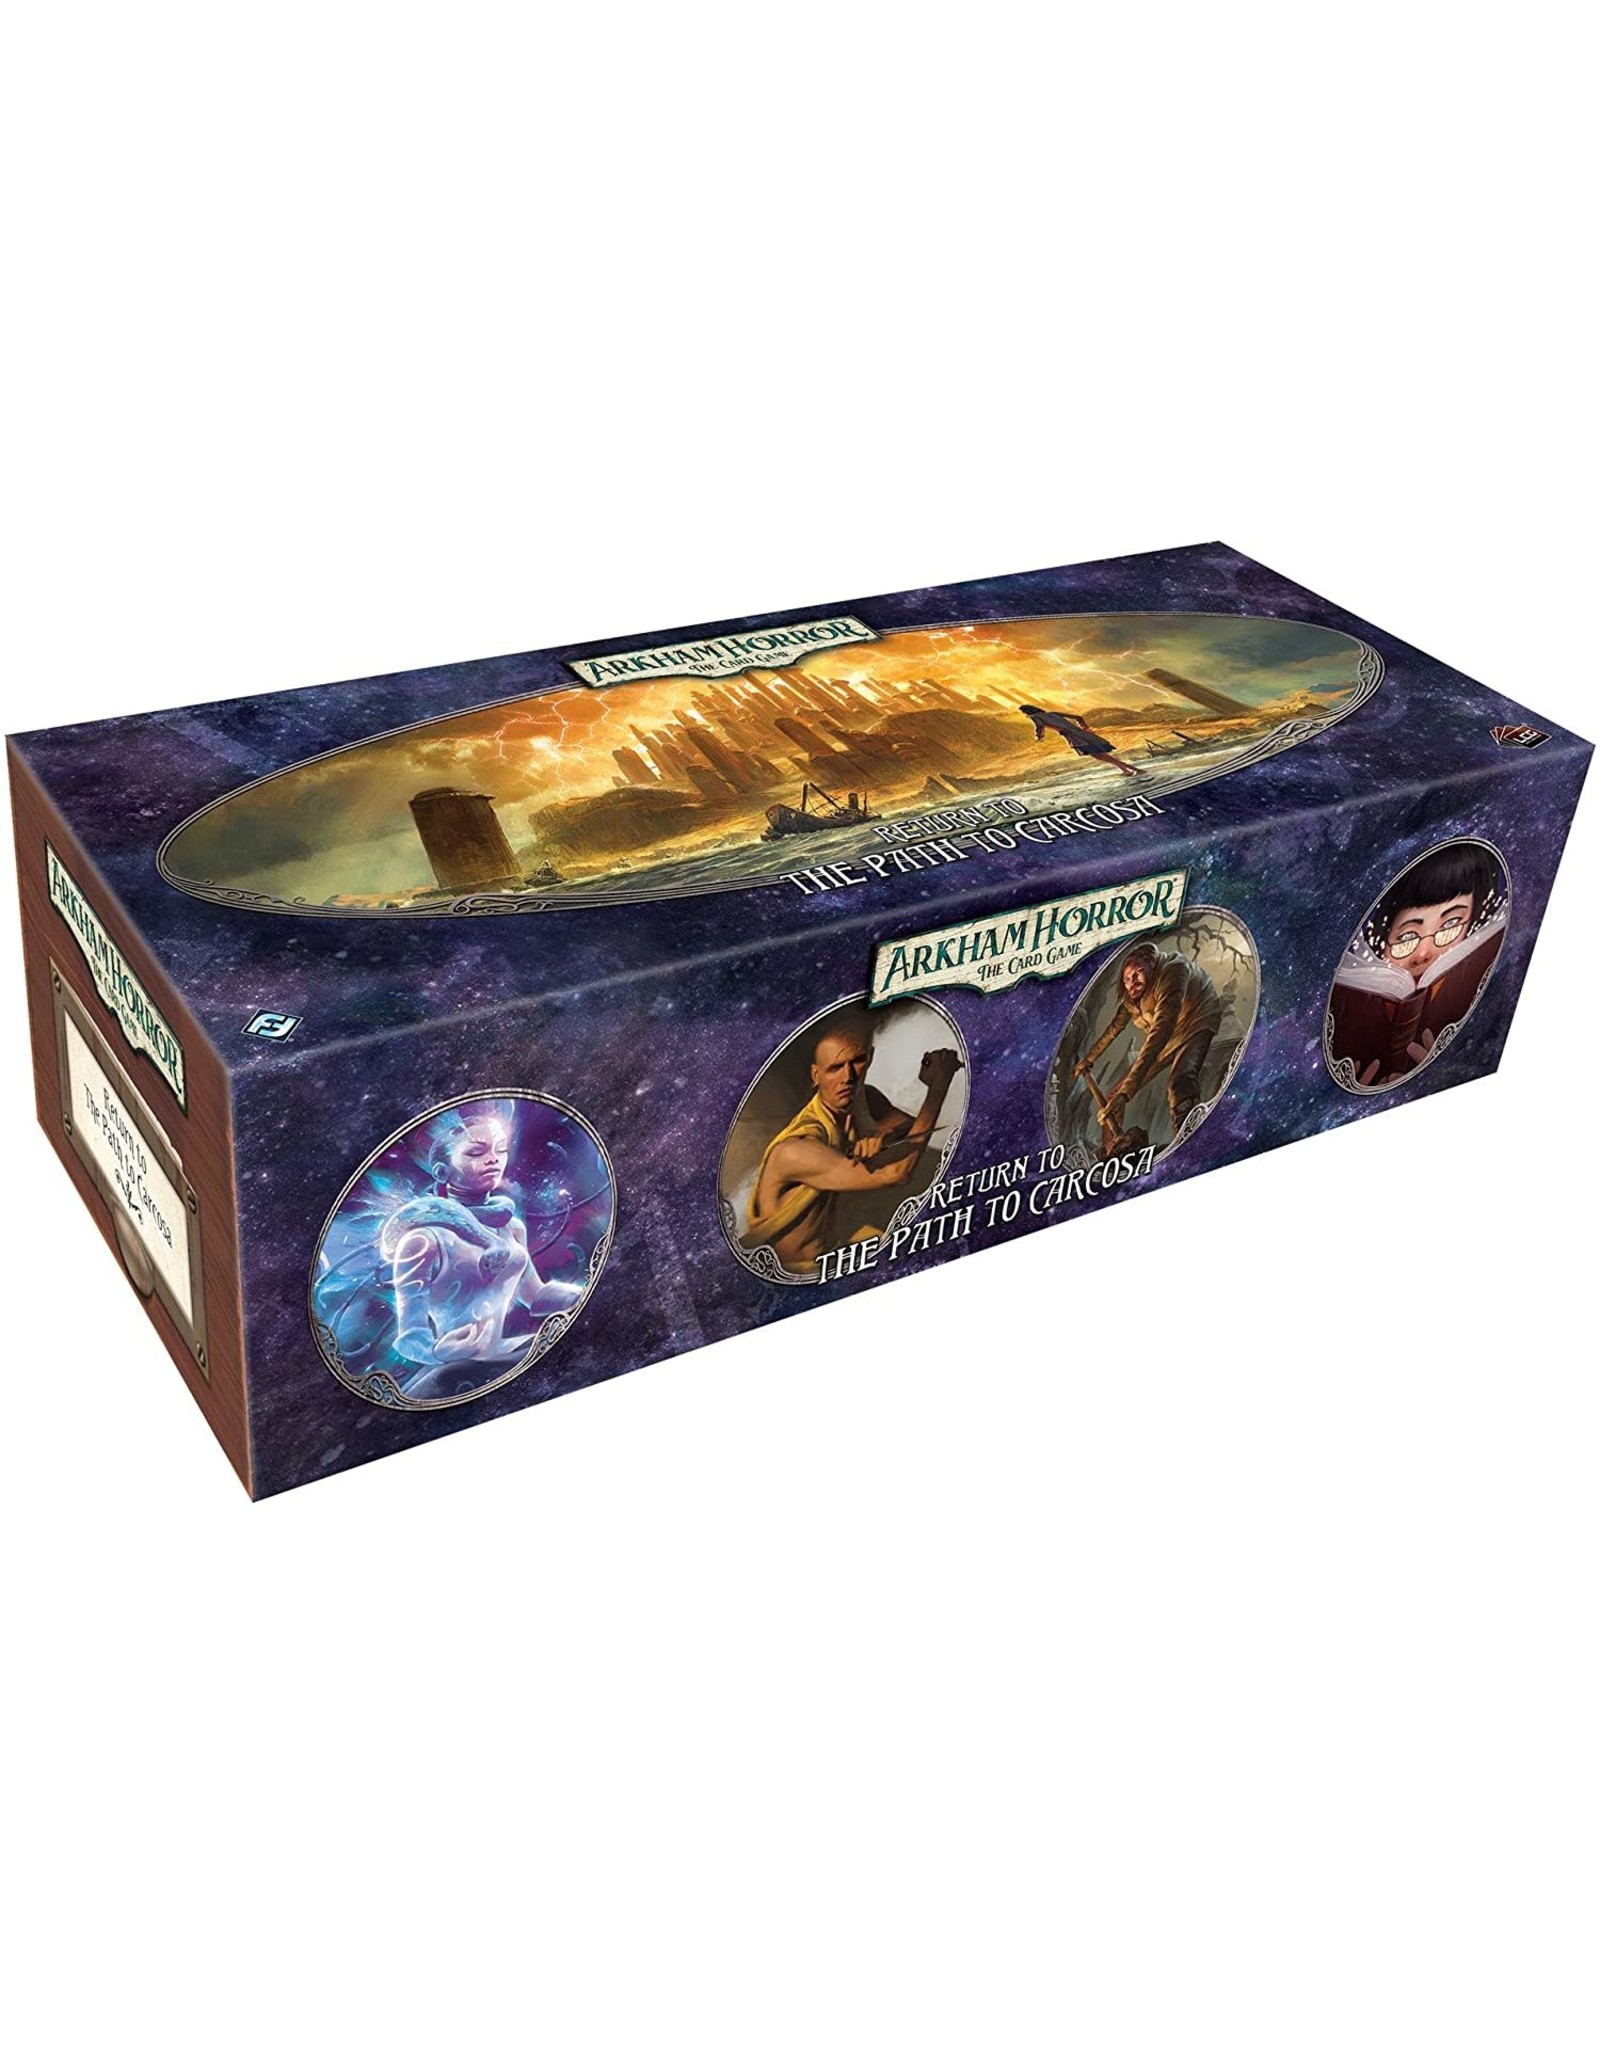 Fantasy Flight Games Arkham Horror: The Card Game - Return to Path to Carcosa